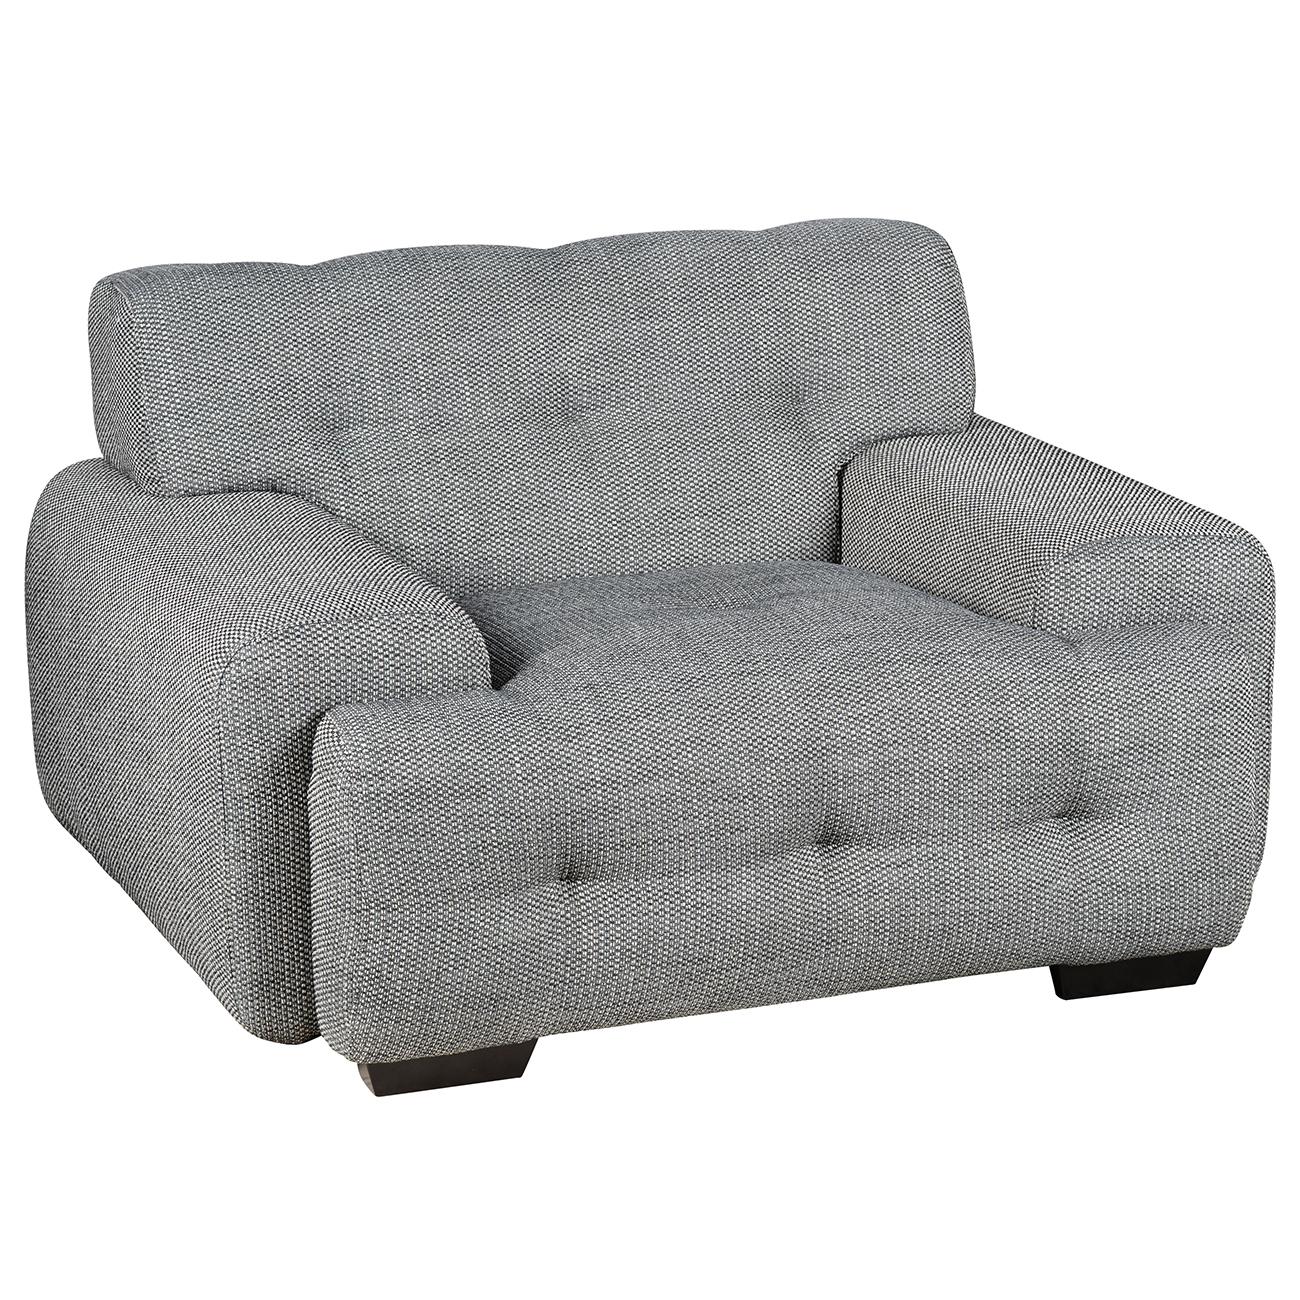 Traditional Sofa AA4235 AA4235-Sofa in White and Gray Polyester